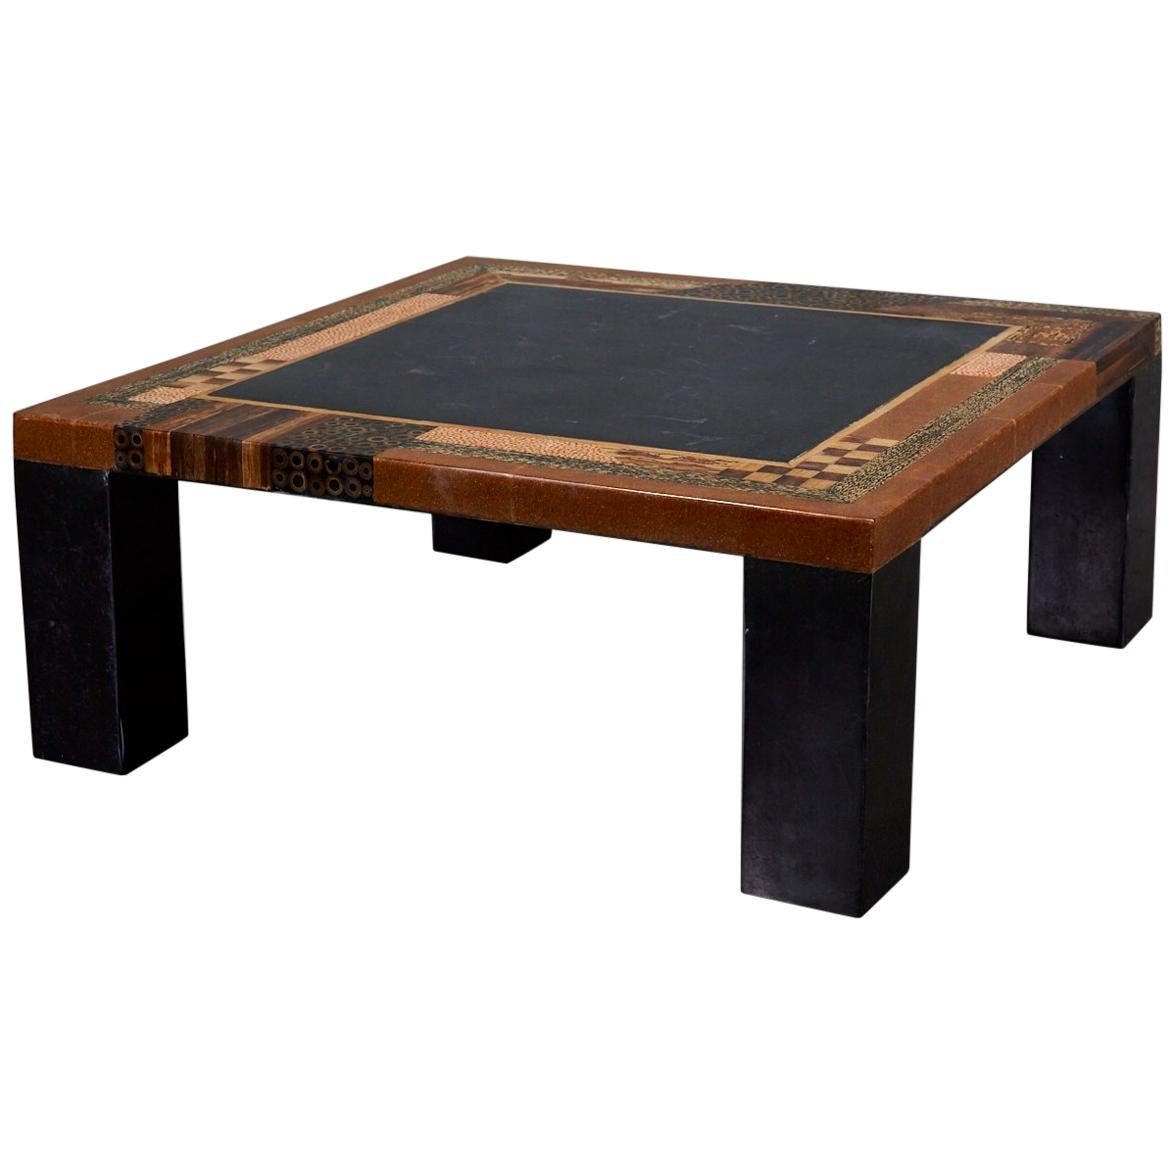 Postmodern Tessellated Black Stone "Collage" Square Cocktail Table, 1990s For Sale